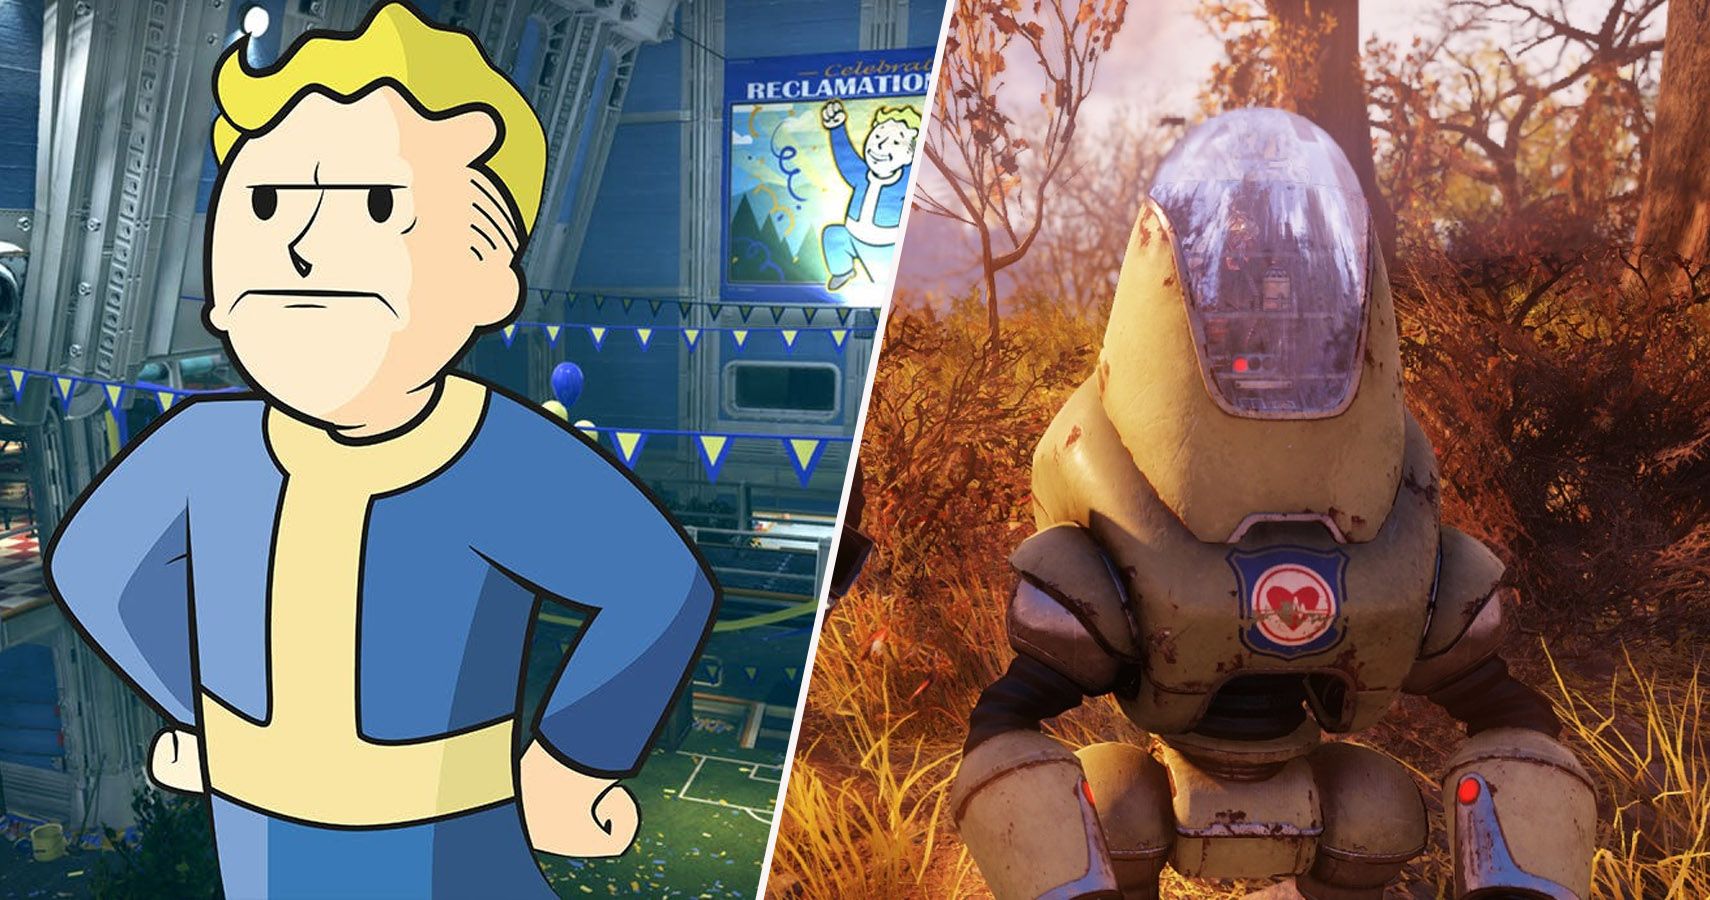 25 Glaring Problems With Fallout 3 We All Choose To Ignore